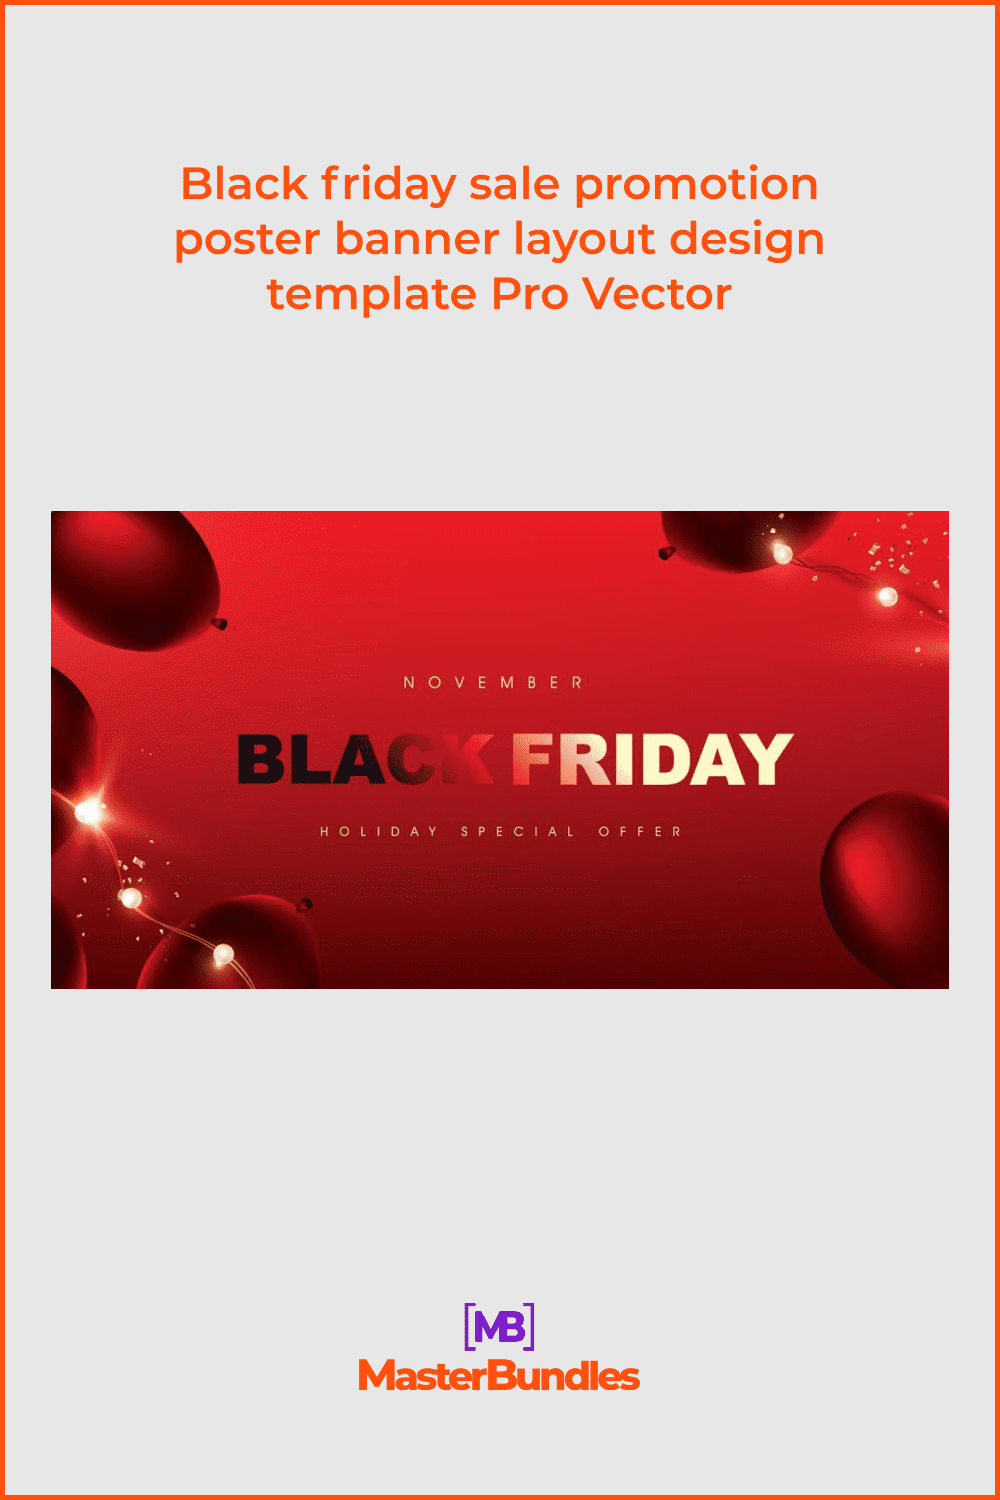 Black Friday promotion banner with red balloons.